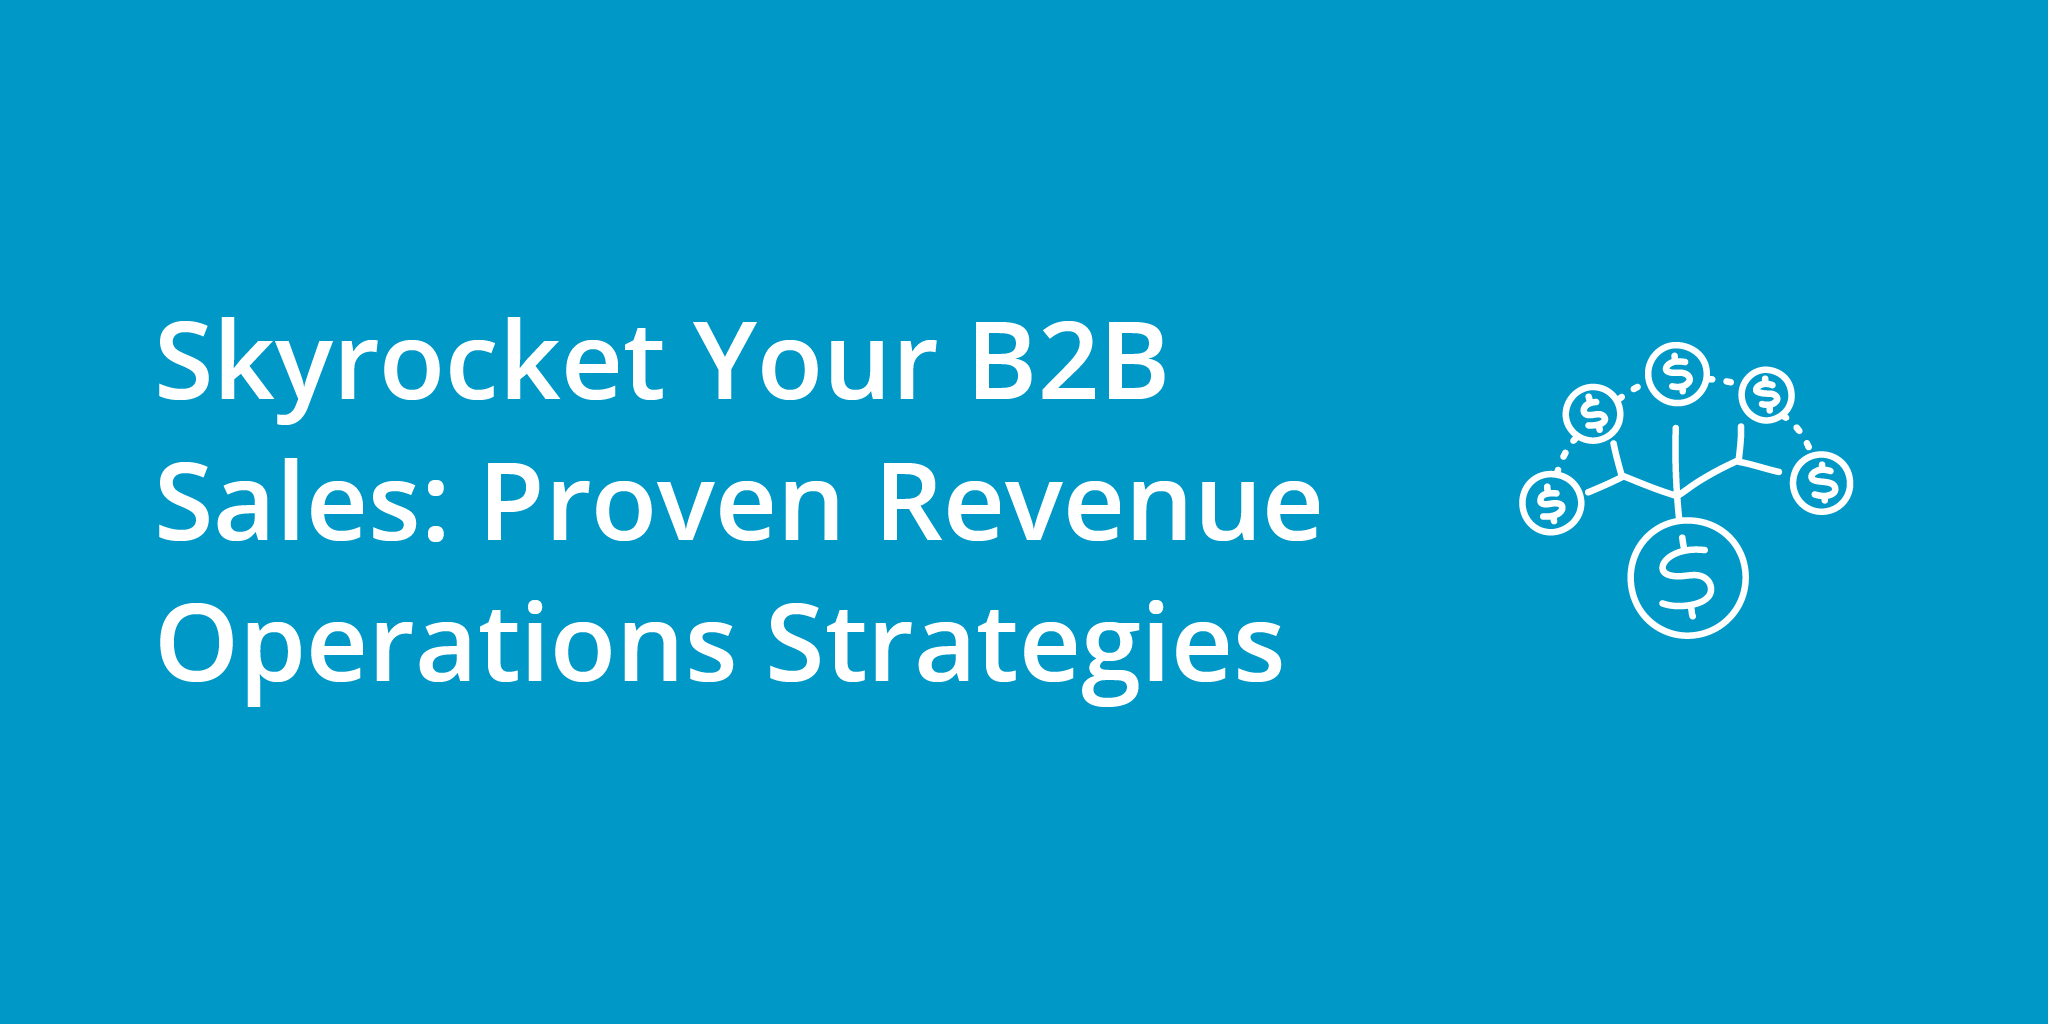 Skyrocket Your B2B Sales: Proven Revenue Operations Strategies | Telephones for business